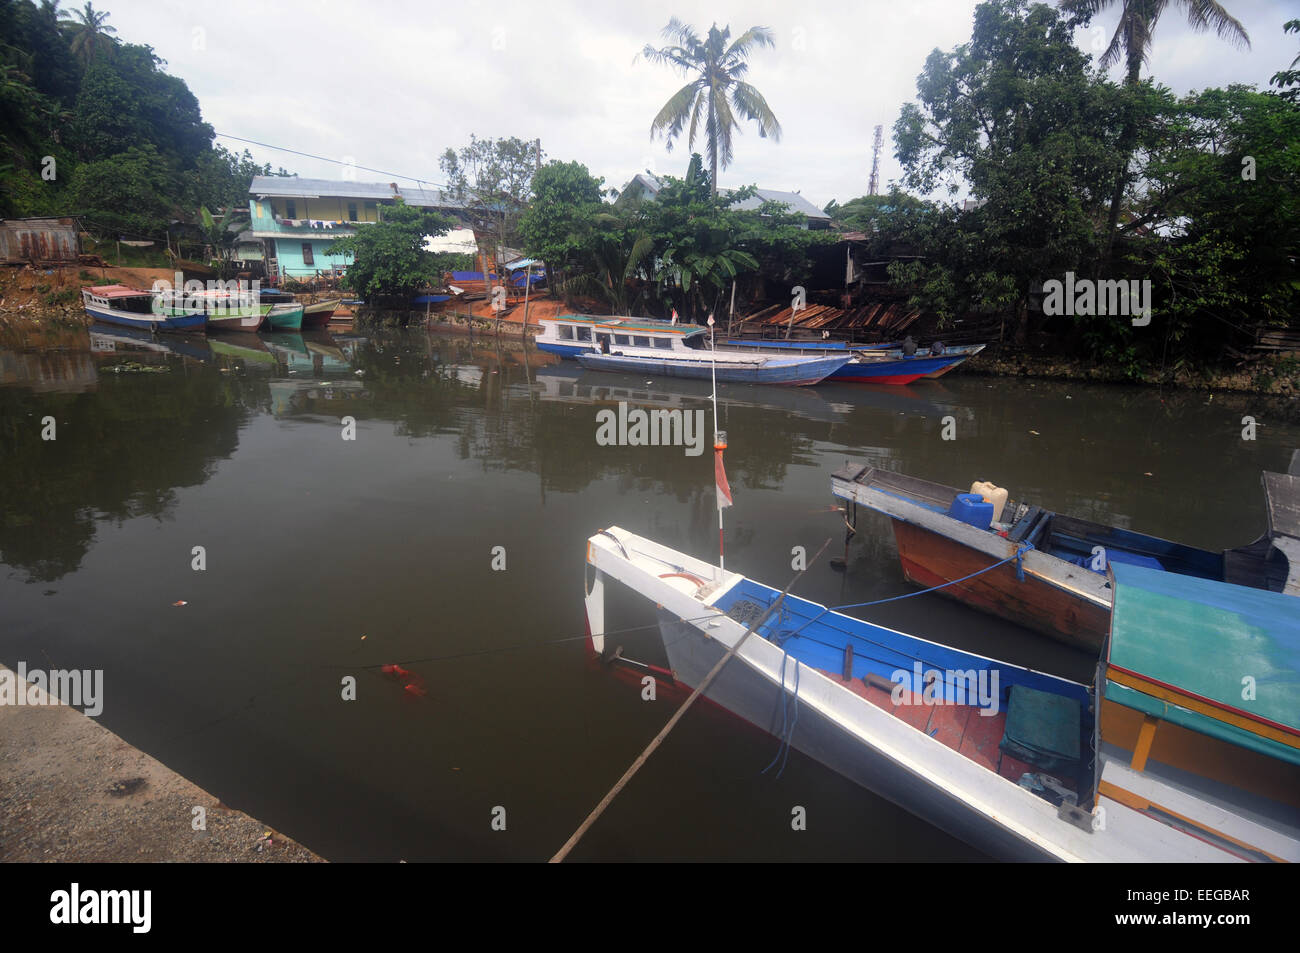 Boats transporting timber to/from sawmills on the riverbank in Sorong, Papua province, Indonesia. No PR or MR Stock Photo